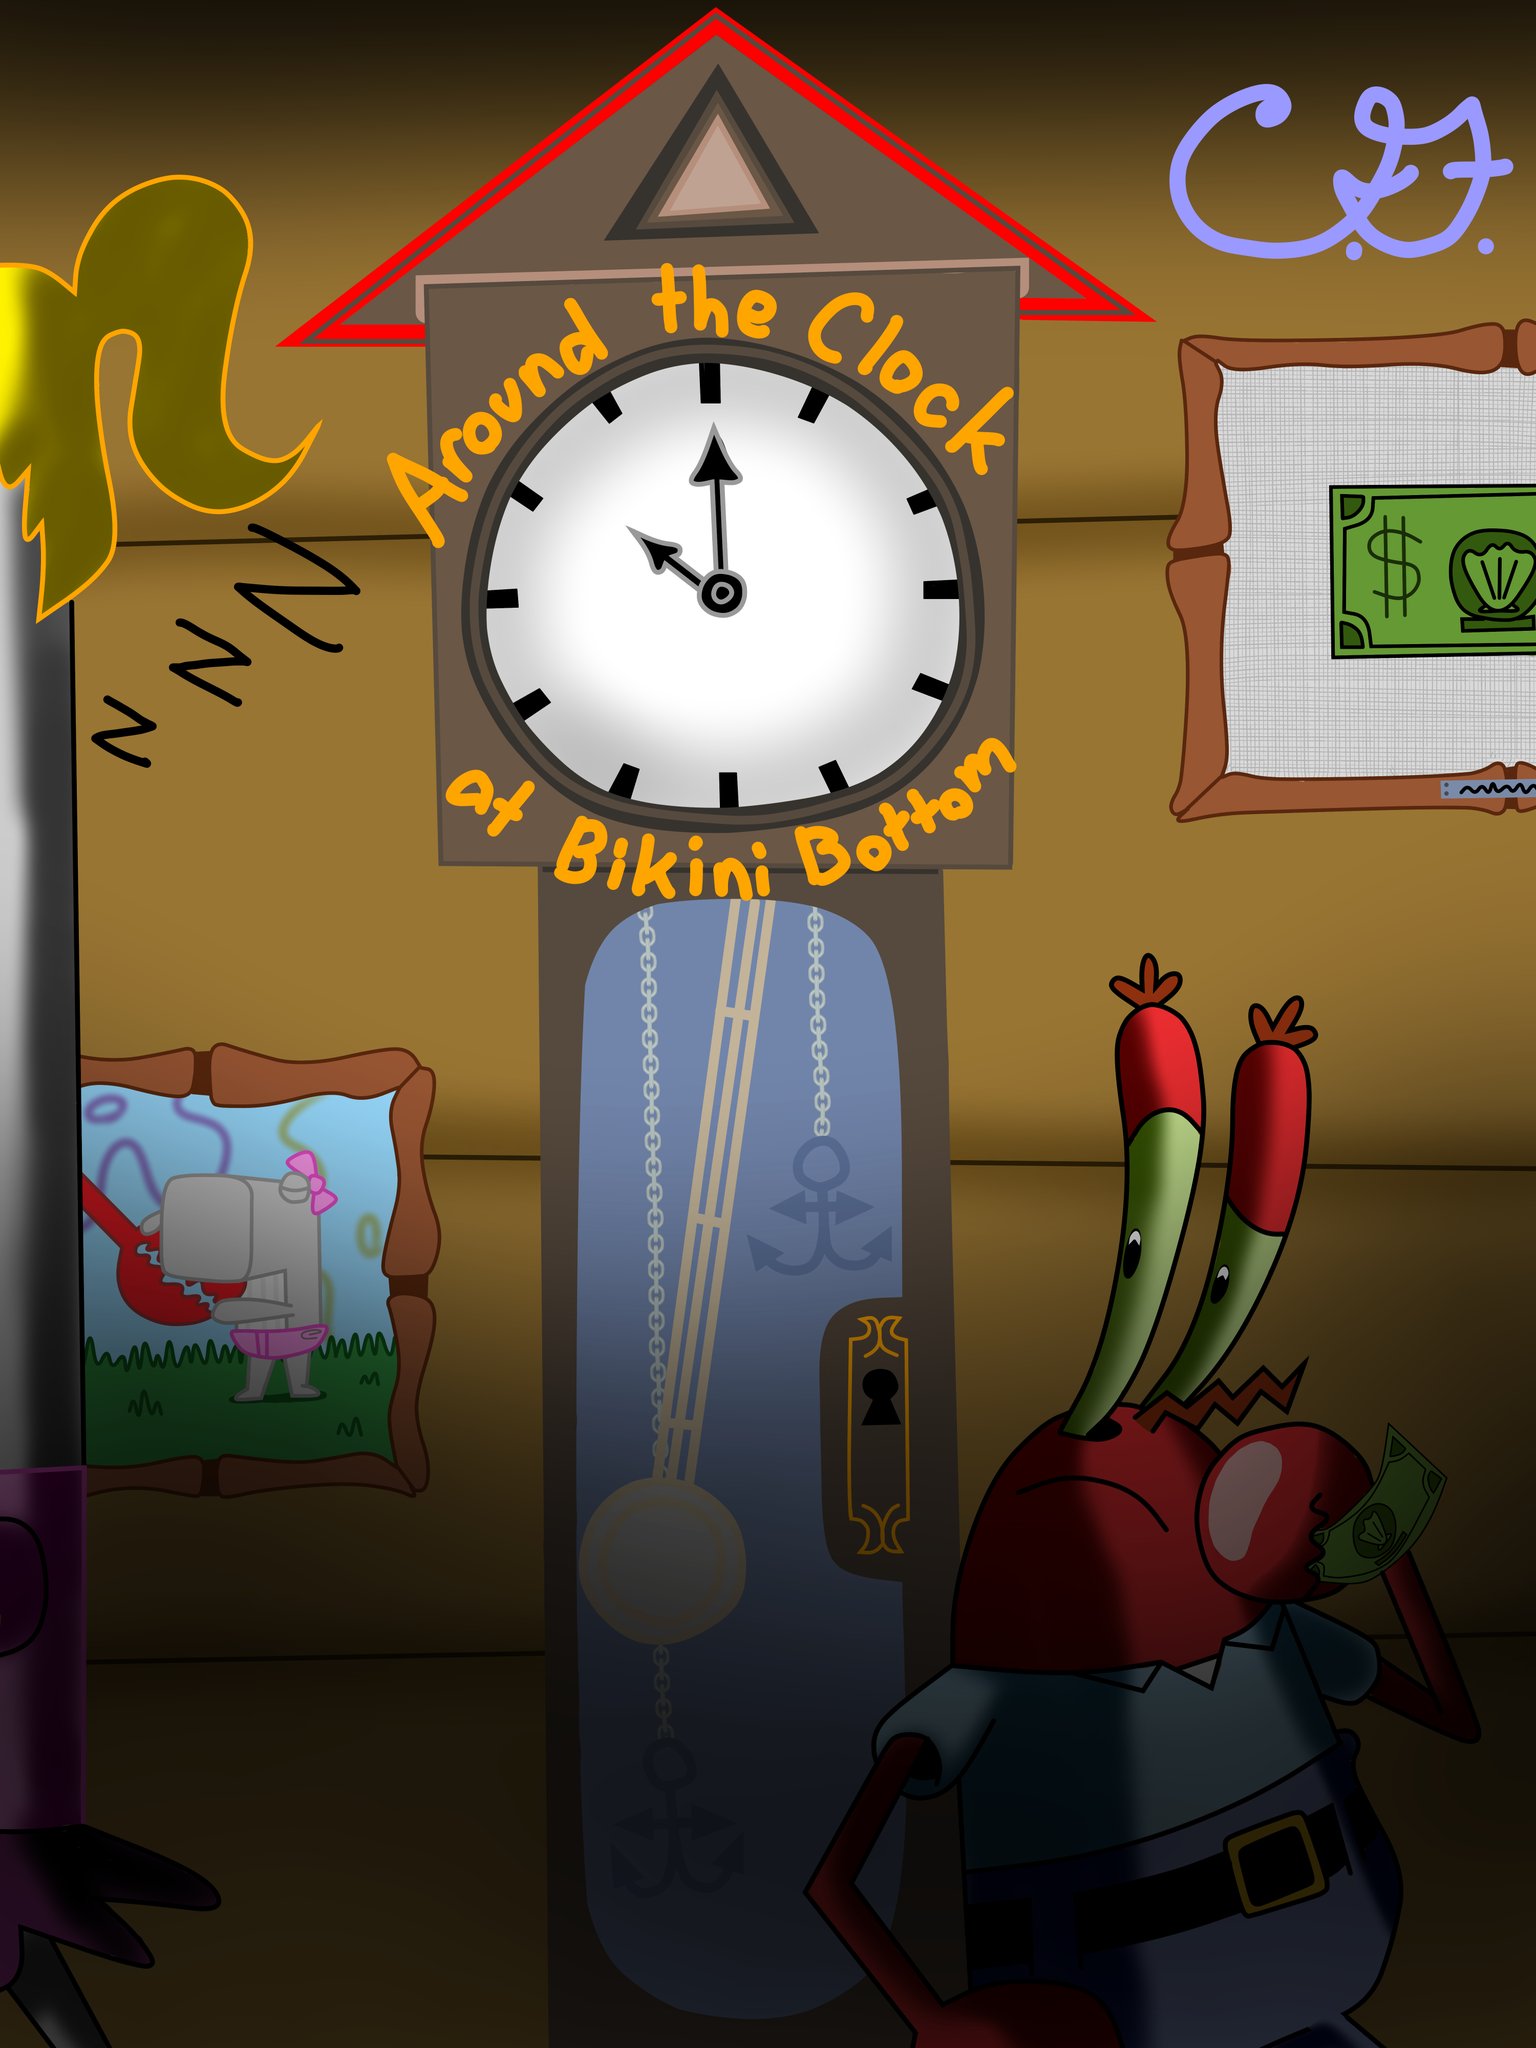 Zeeman Stationair ondersteboven TheFallenStars on Twitter: "Took awhile, but here's three more drawings  from Around the Clock at Bikini Bottom. I seriously love this game.  #aroundtheclockatbikinibottom #davemicrowavegames #aroundtheclock  https://t.co/4VF64CDq3r" / Twitter